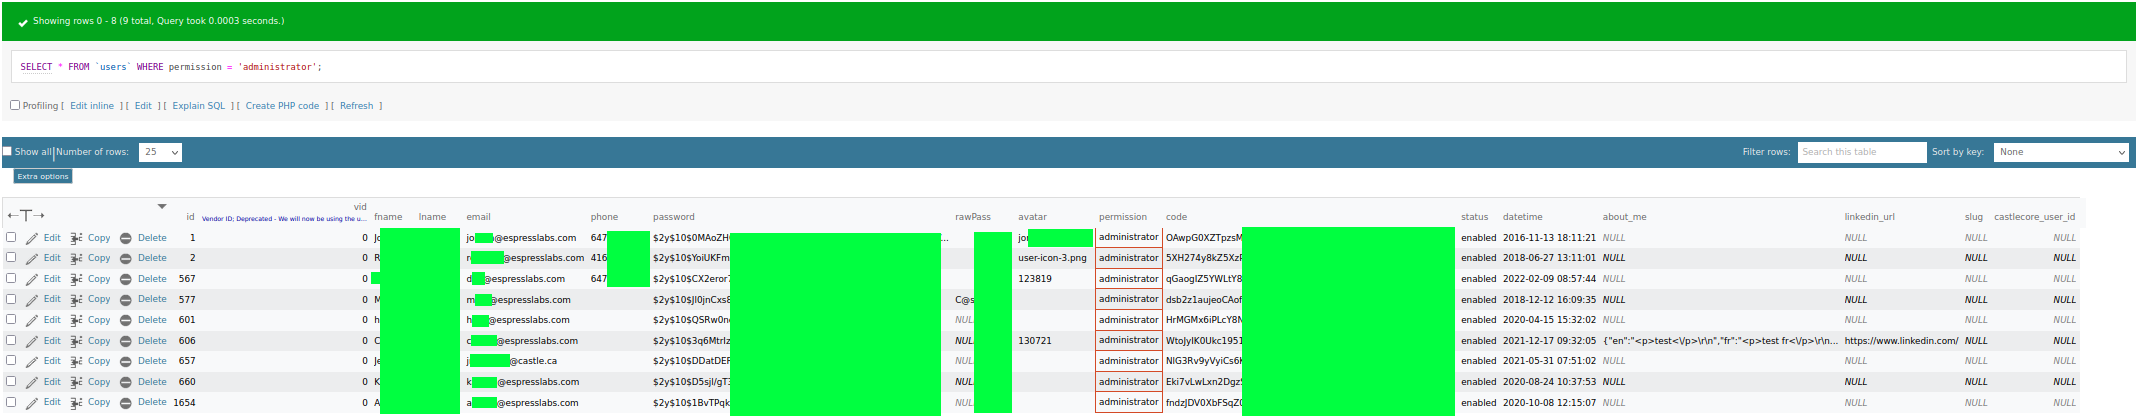 A screenshot of the users table, filtering only the administrators.